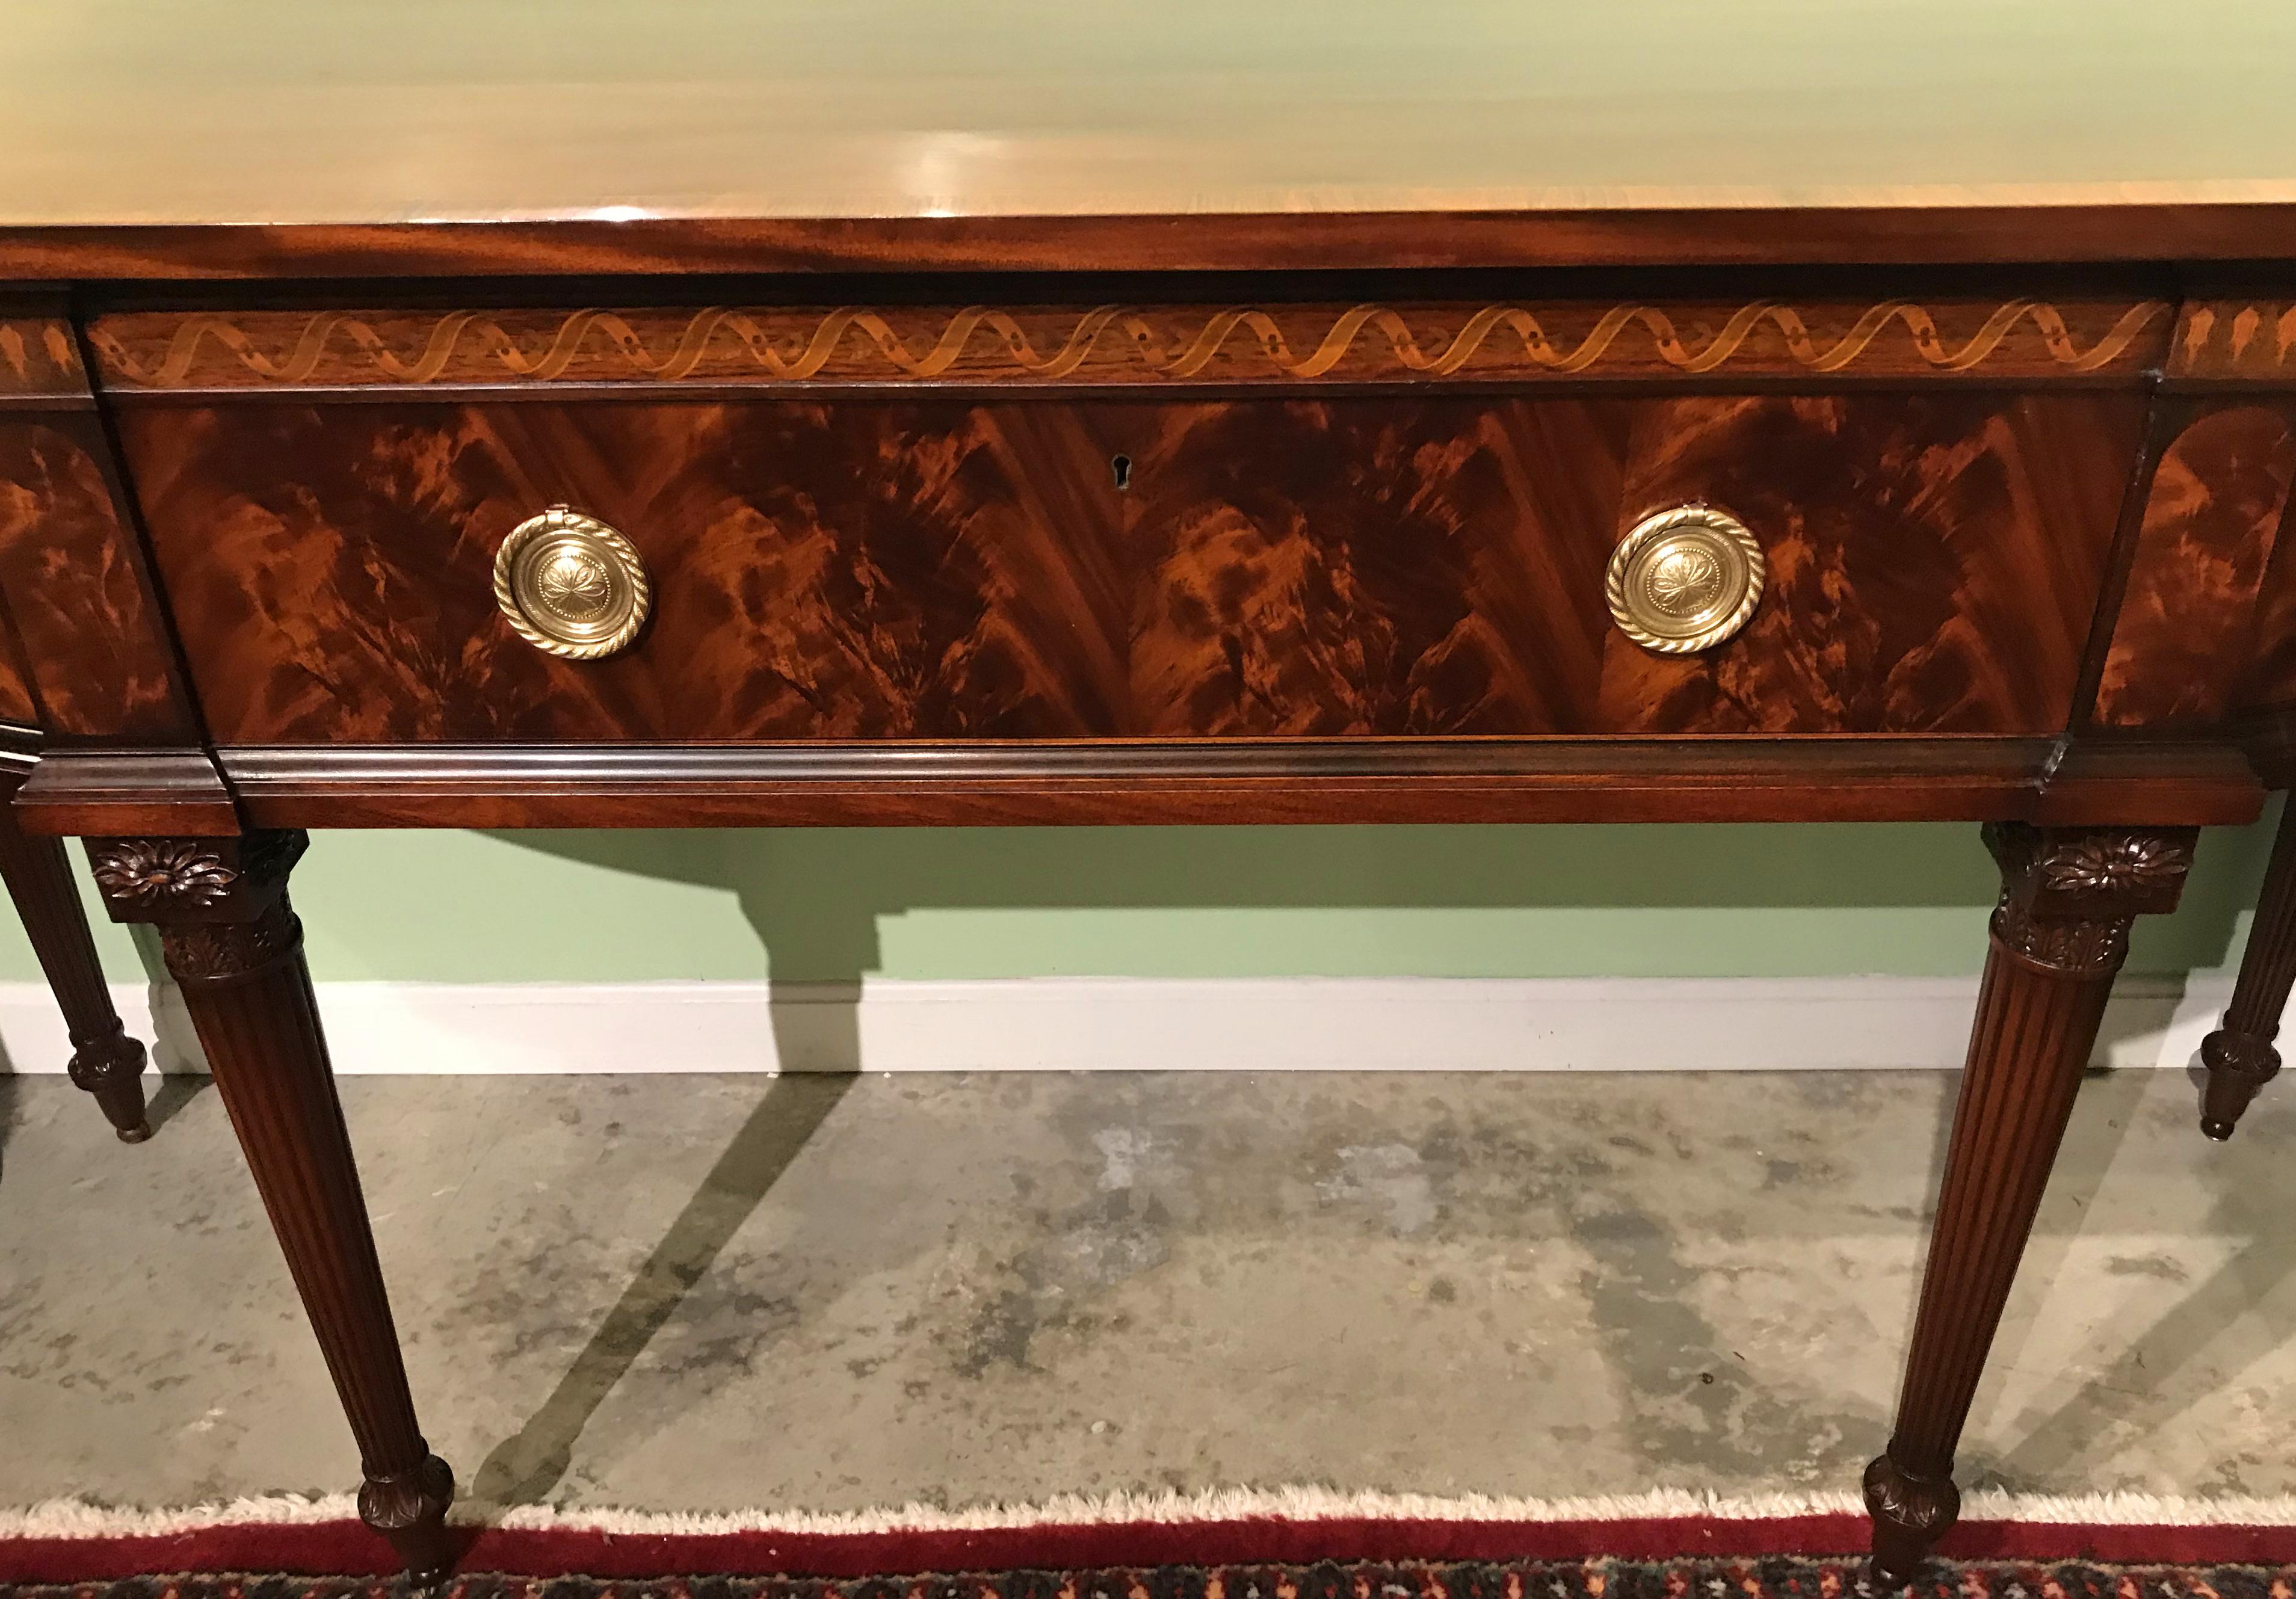 An exceptional Georgian style custom mahogany demilune server or sideboard by Joseph Gerte of Boston MA, with conforming top with rosewood surmounting a center lined frieze drawer with sliding sections that can accommodate two layers of flatware,